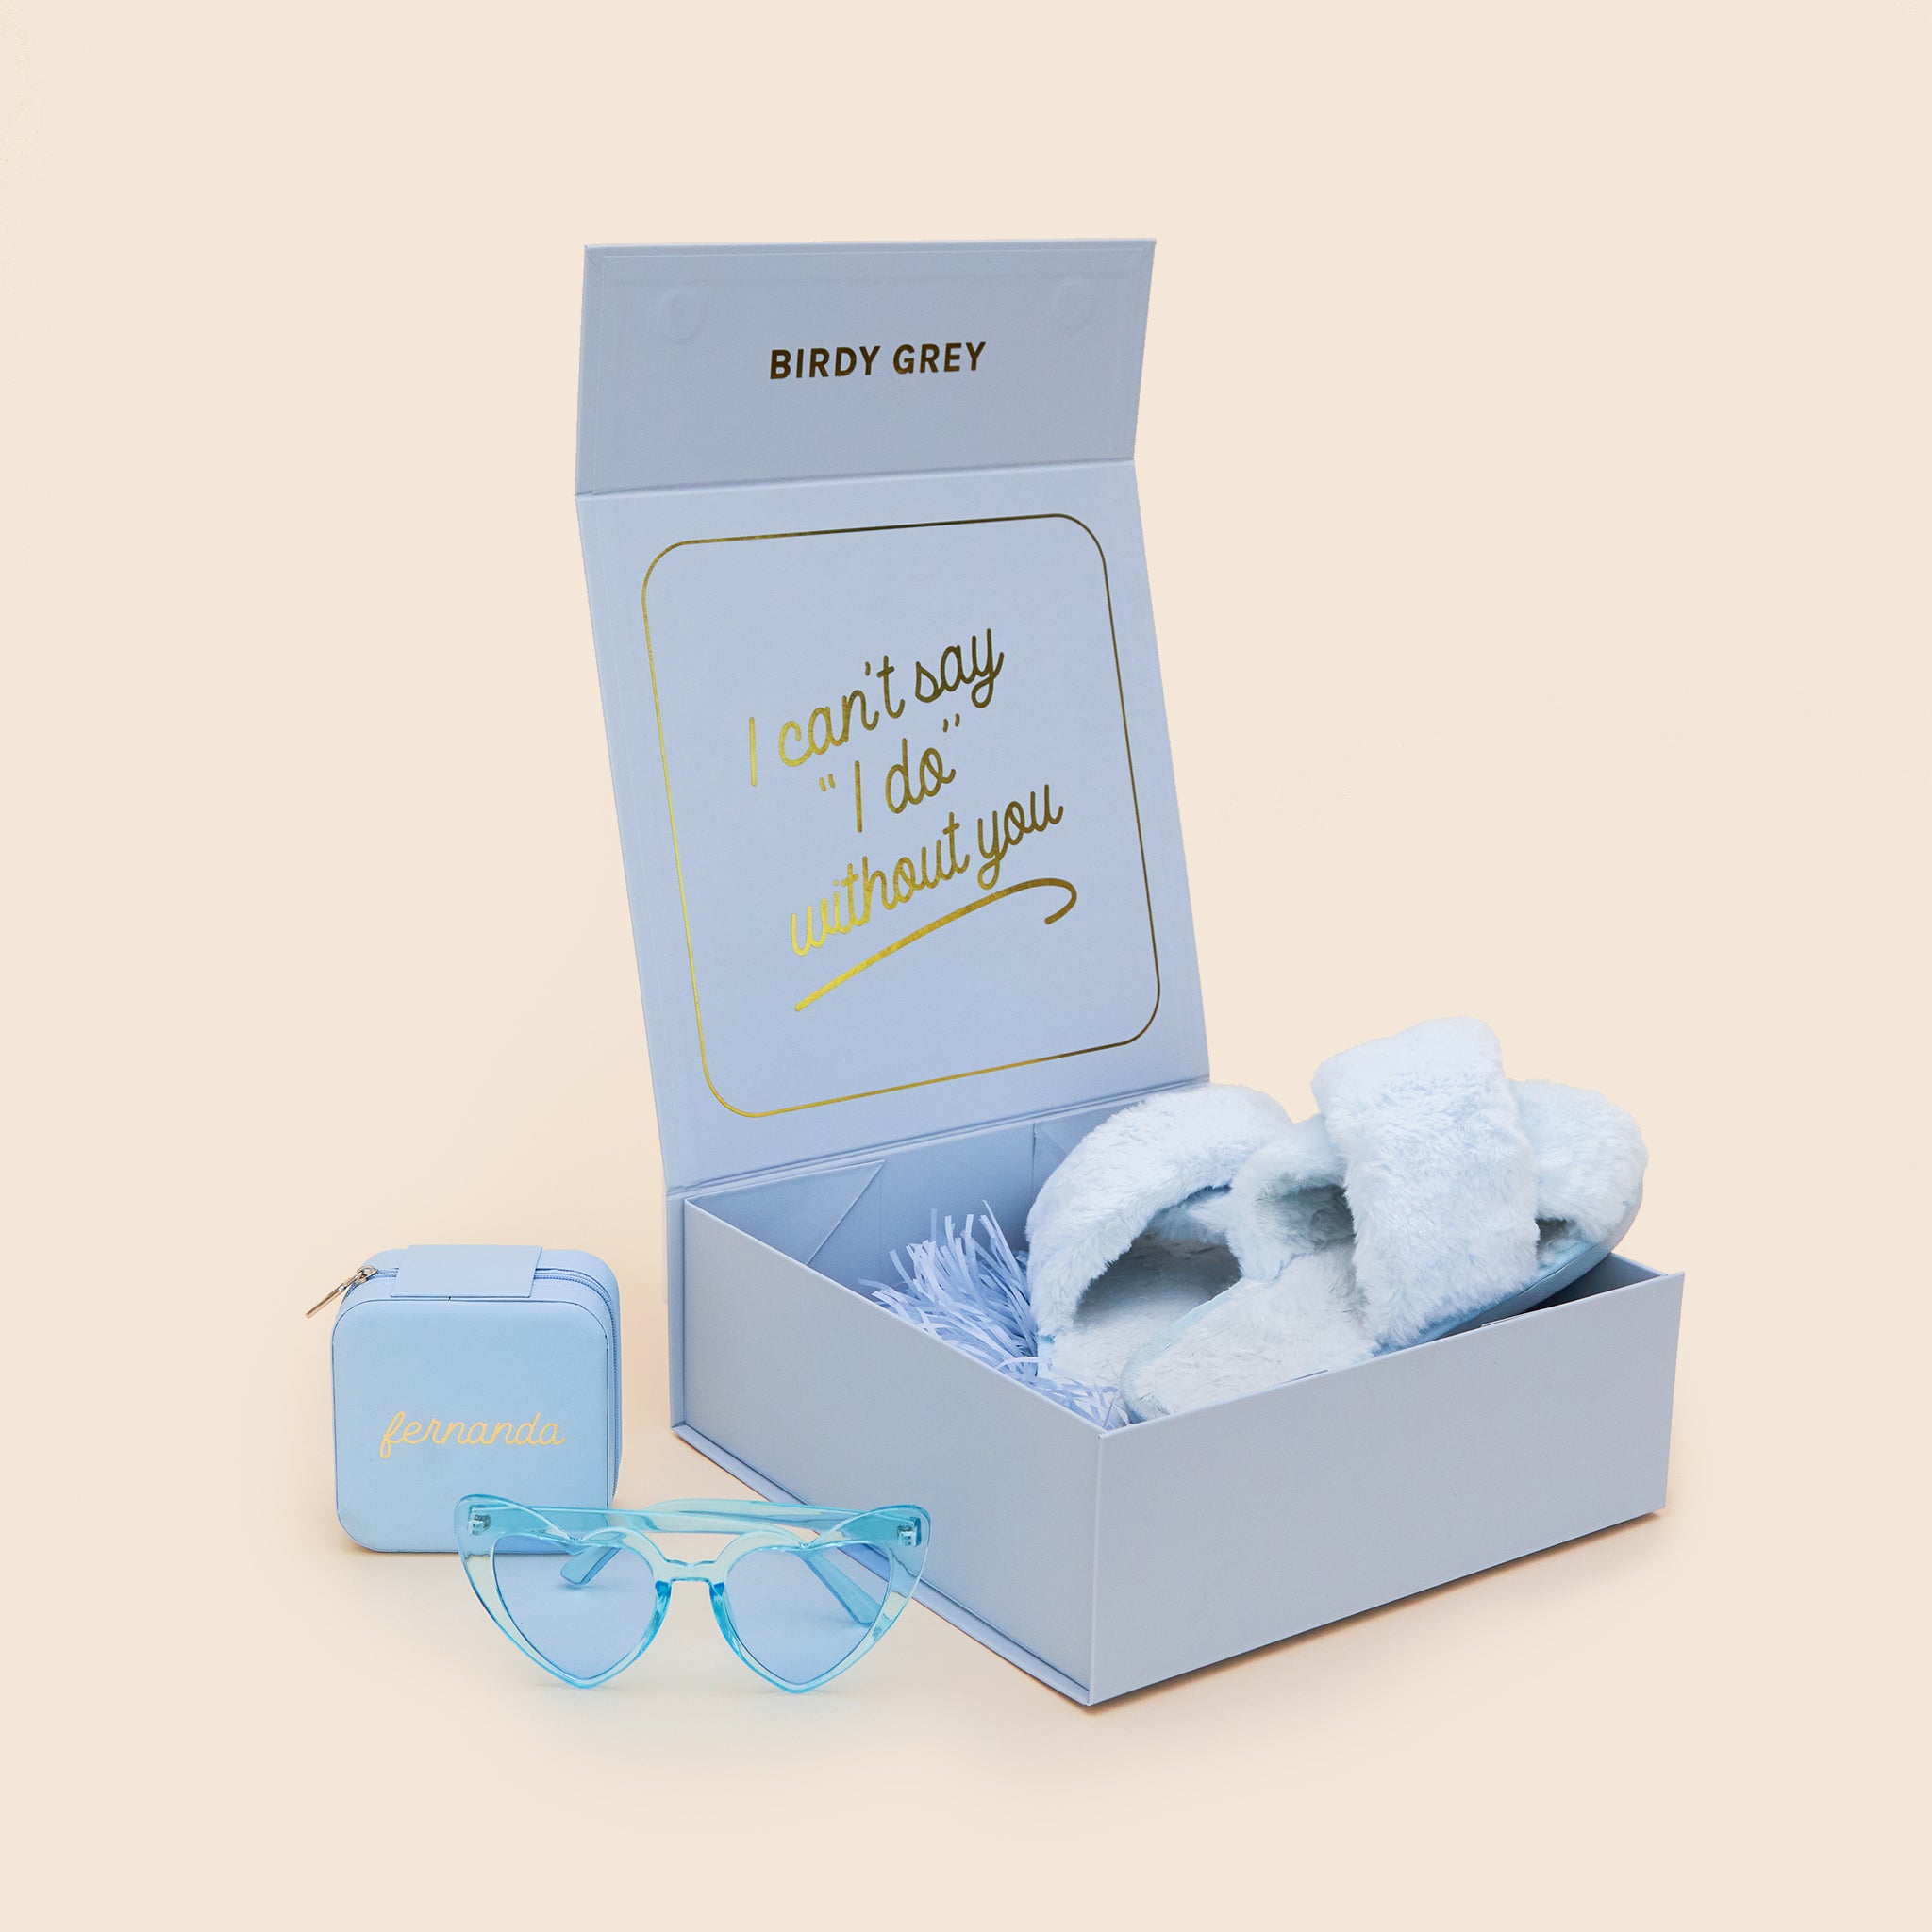 Personalized Proposal Box with jewelry box, sunglasses and slippers in Champagne, front view